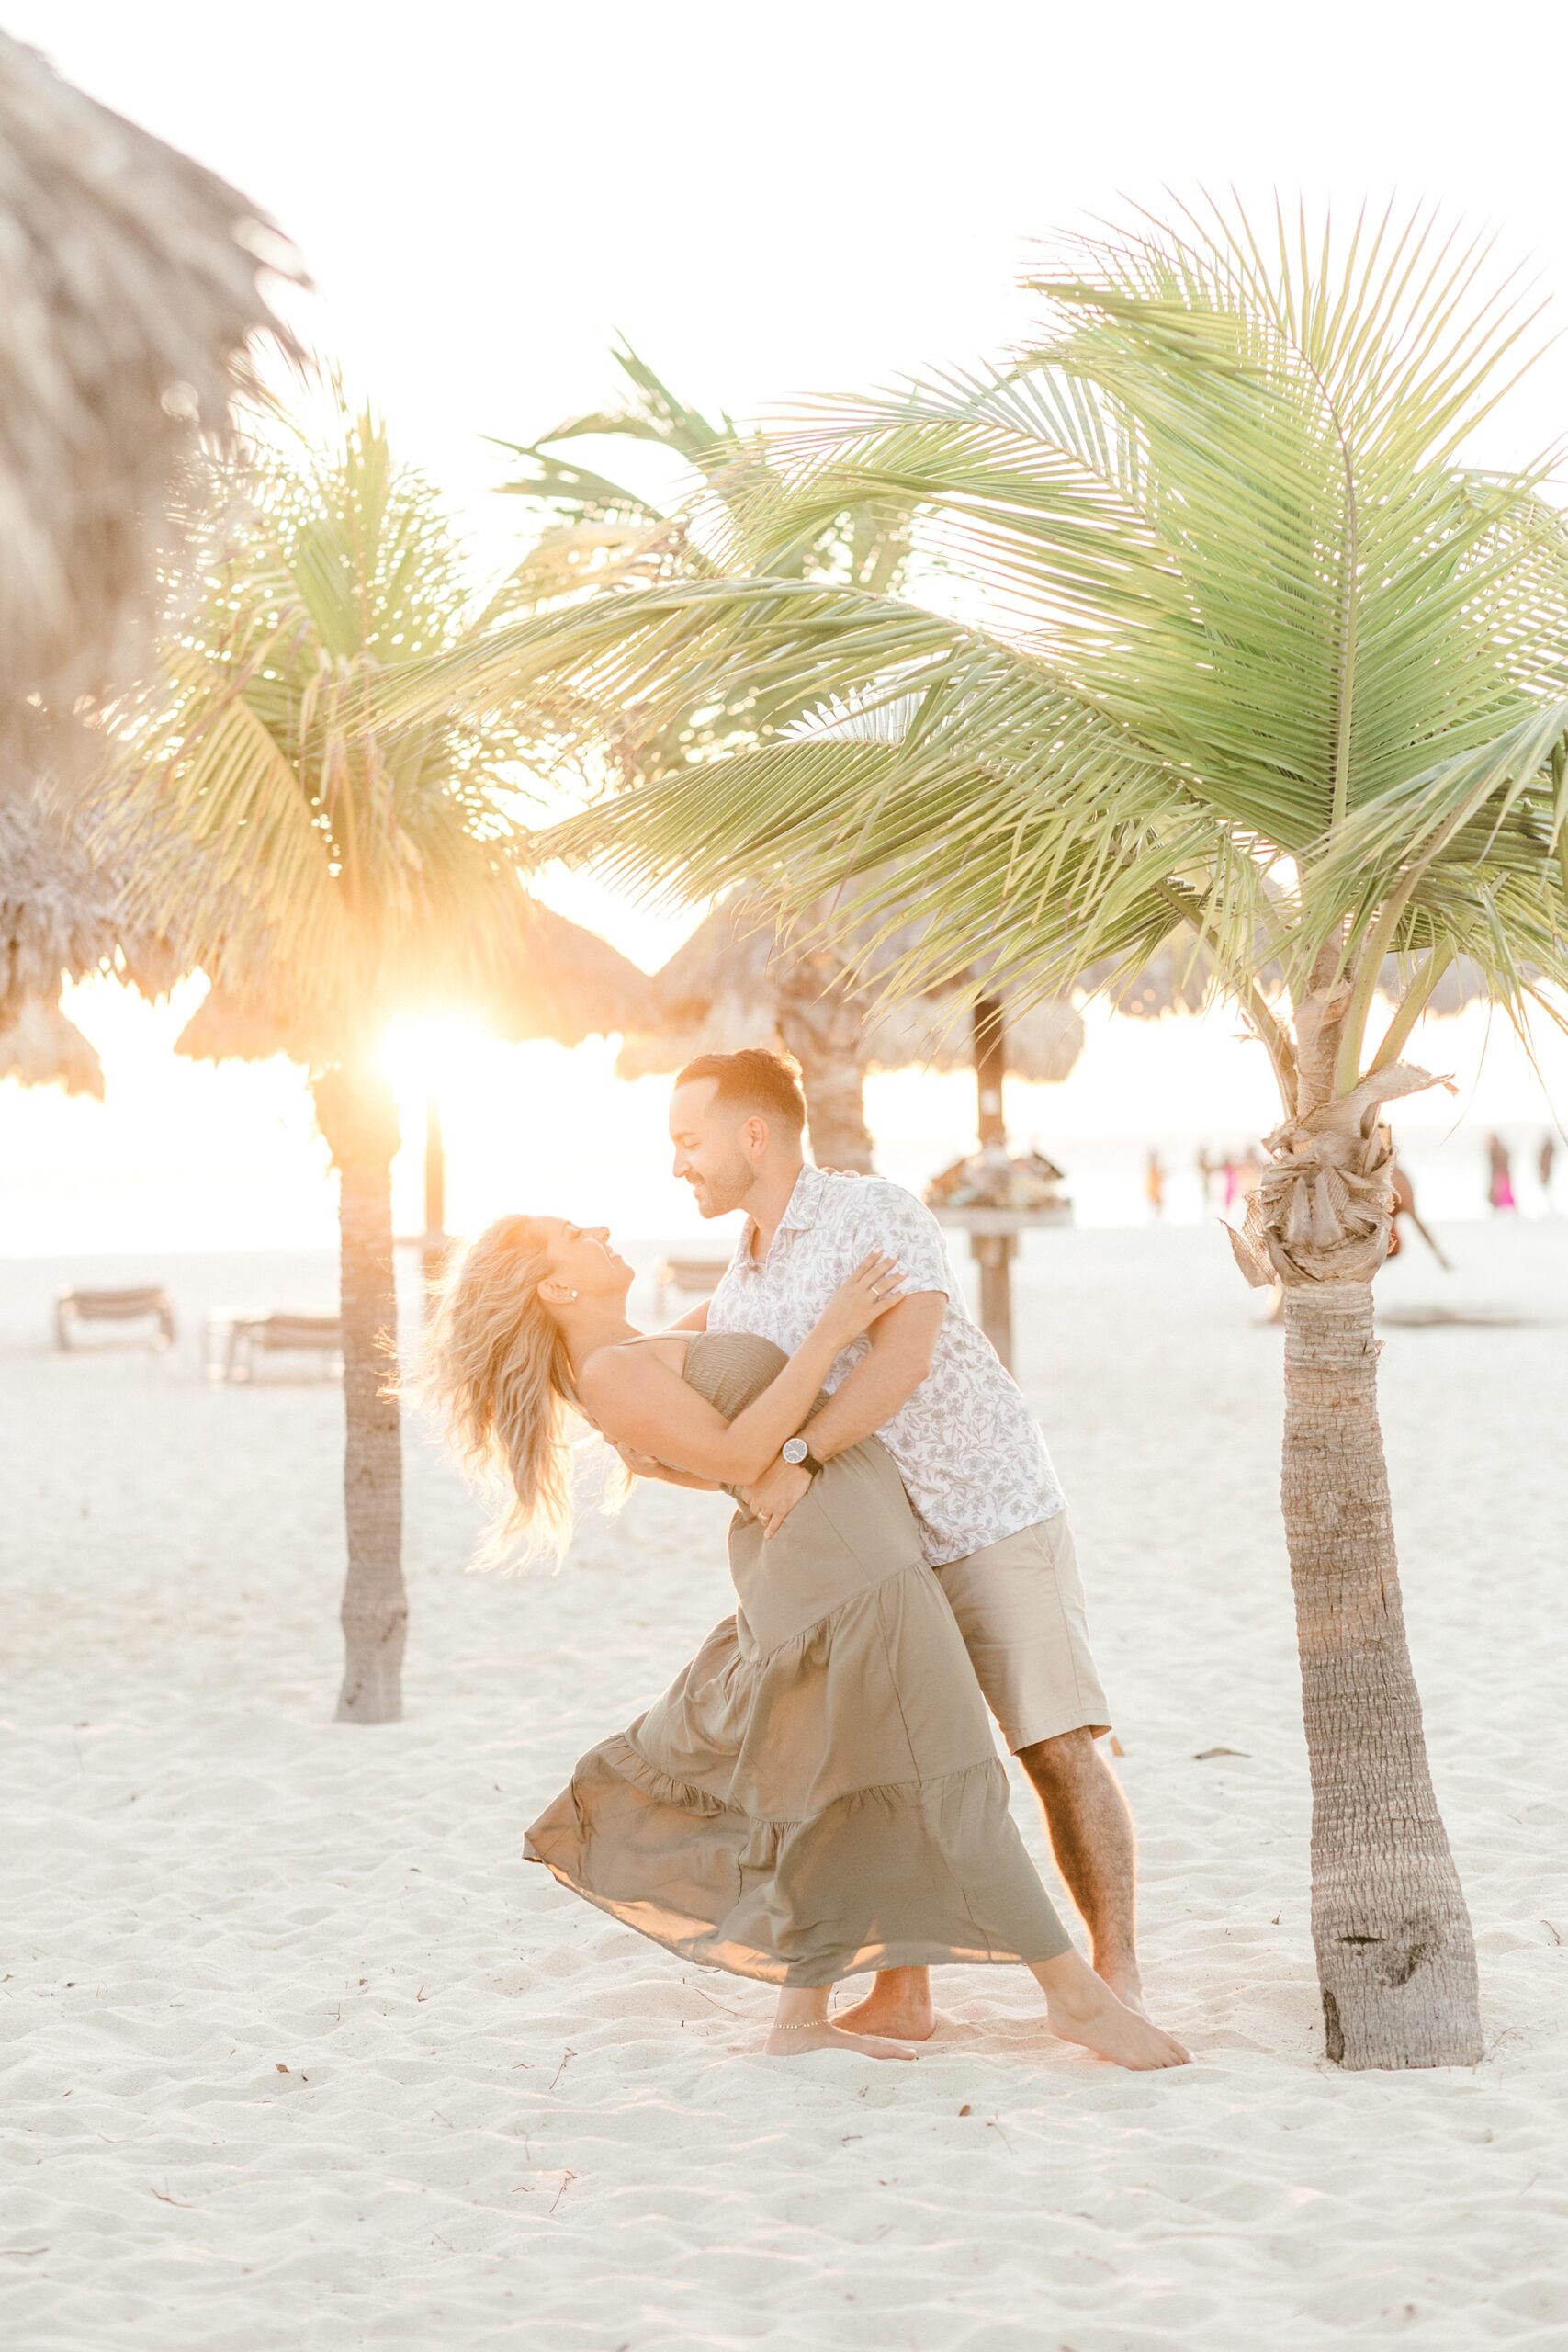 man dips wife on beach at sunset with sun coming through palm trees